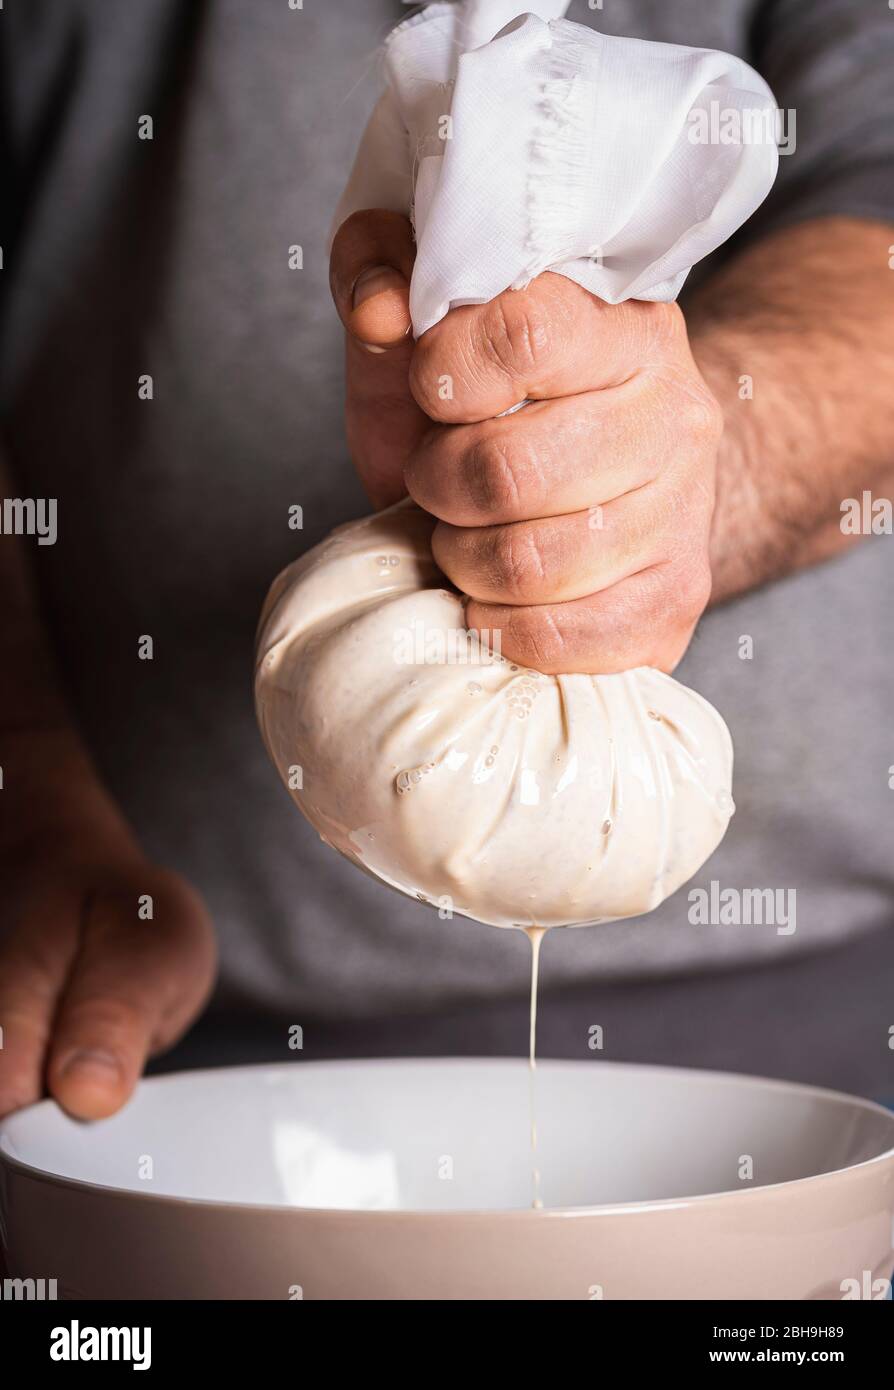 Man making horchata, squeezing almonds and rice paste. Horchata is a mexican traditional drink made up of rice and almonds soaked in milk, flavored wi Stock Photo